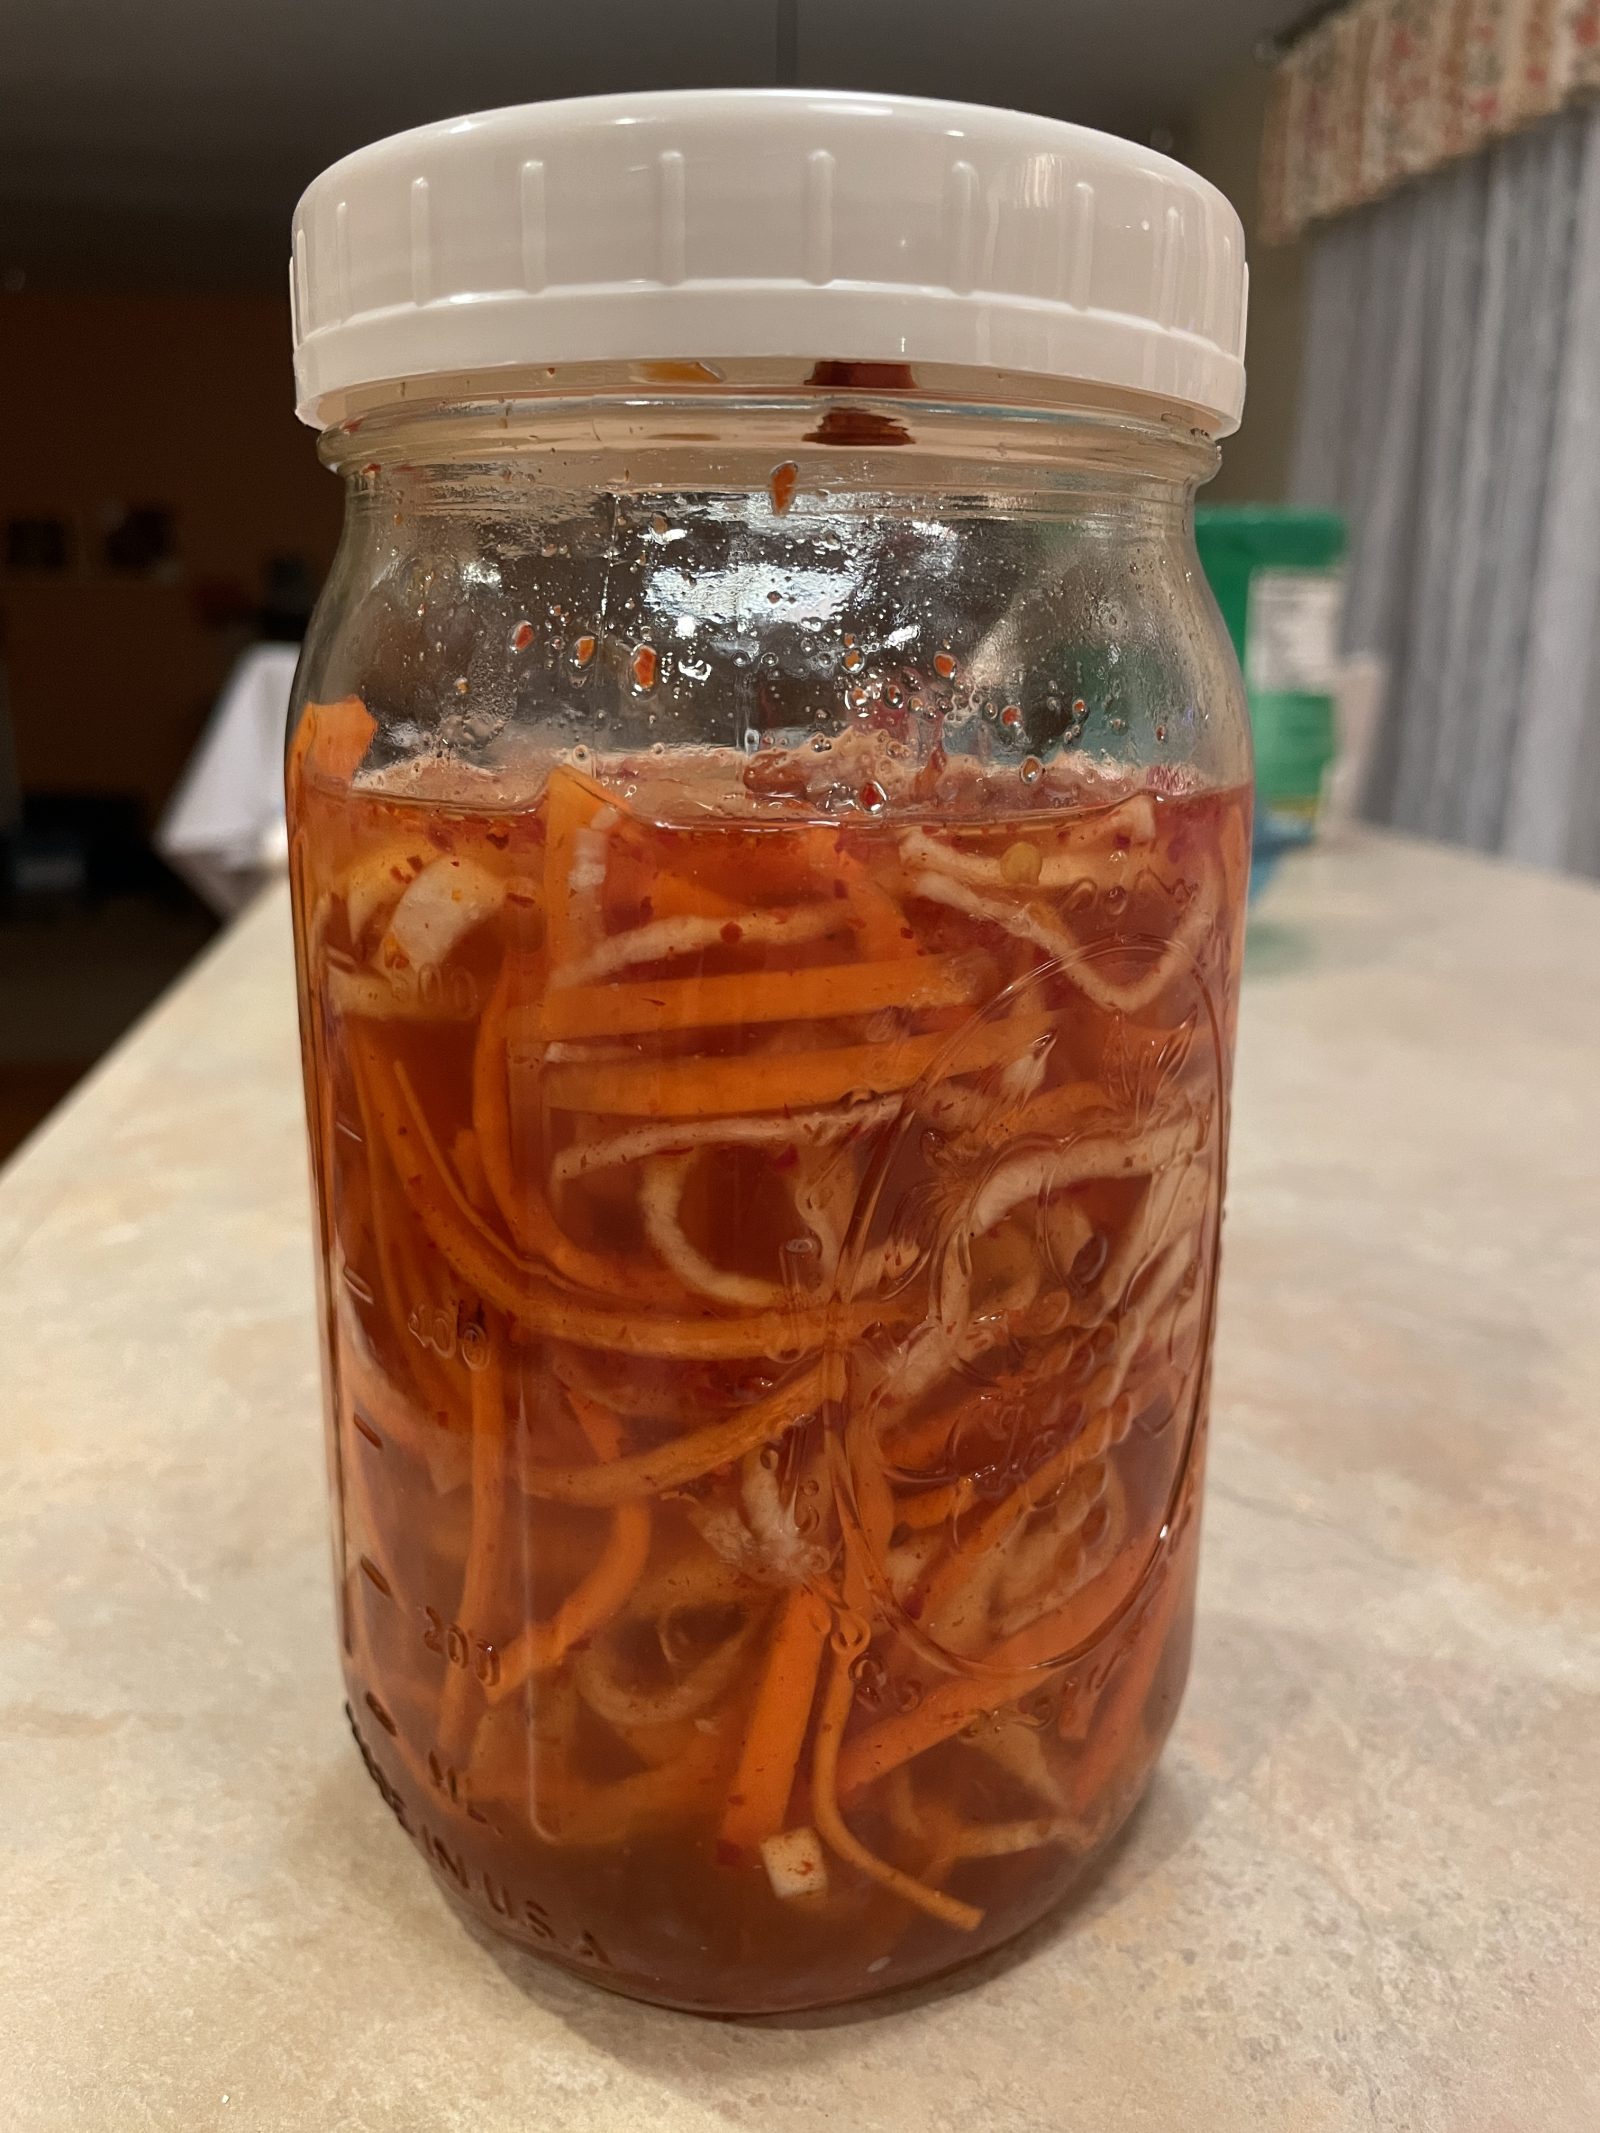 Pickled daikon and carrot.  Yeah, that's a lot.